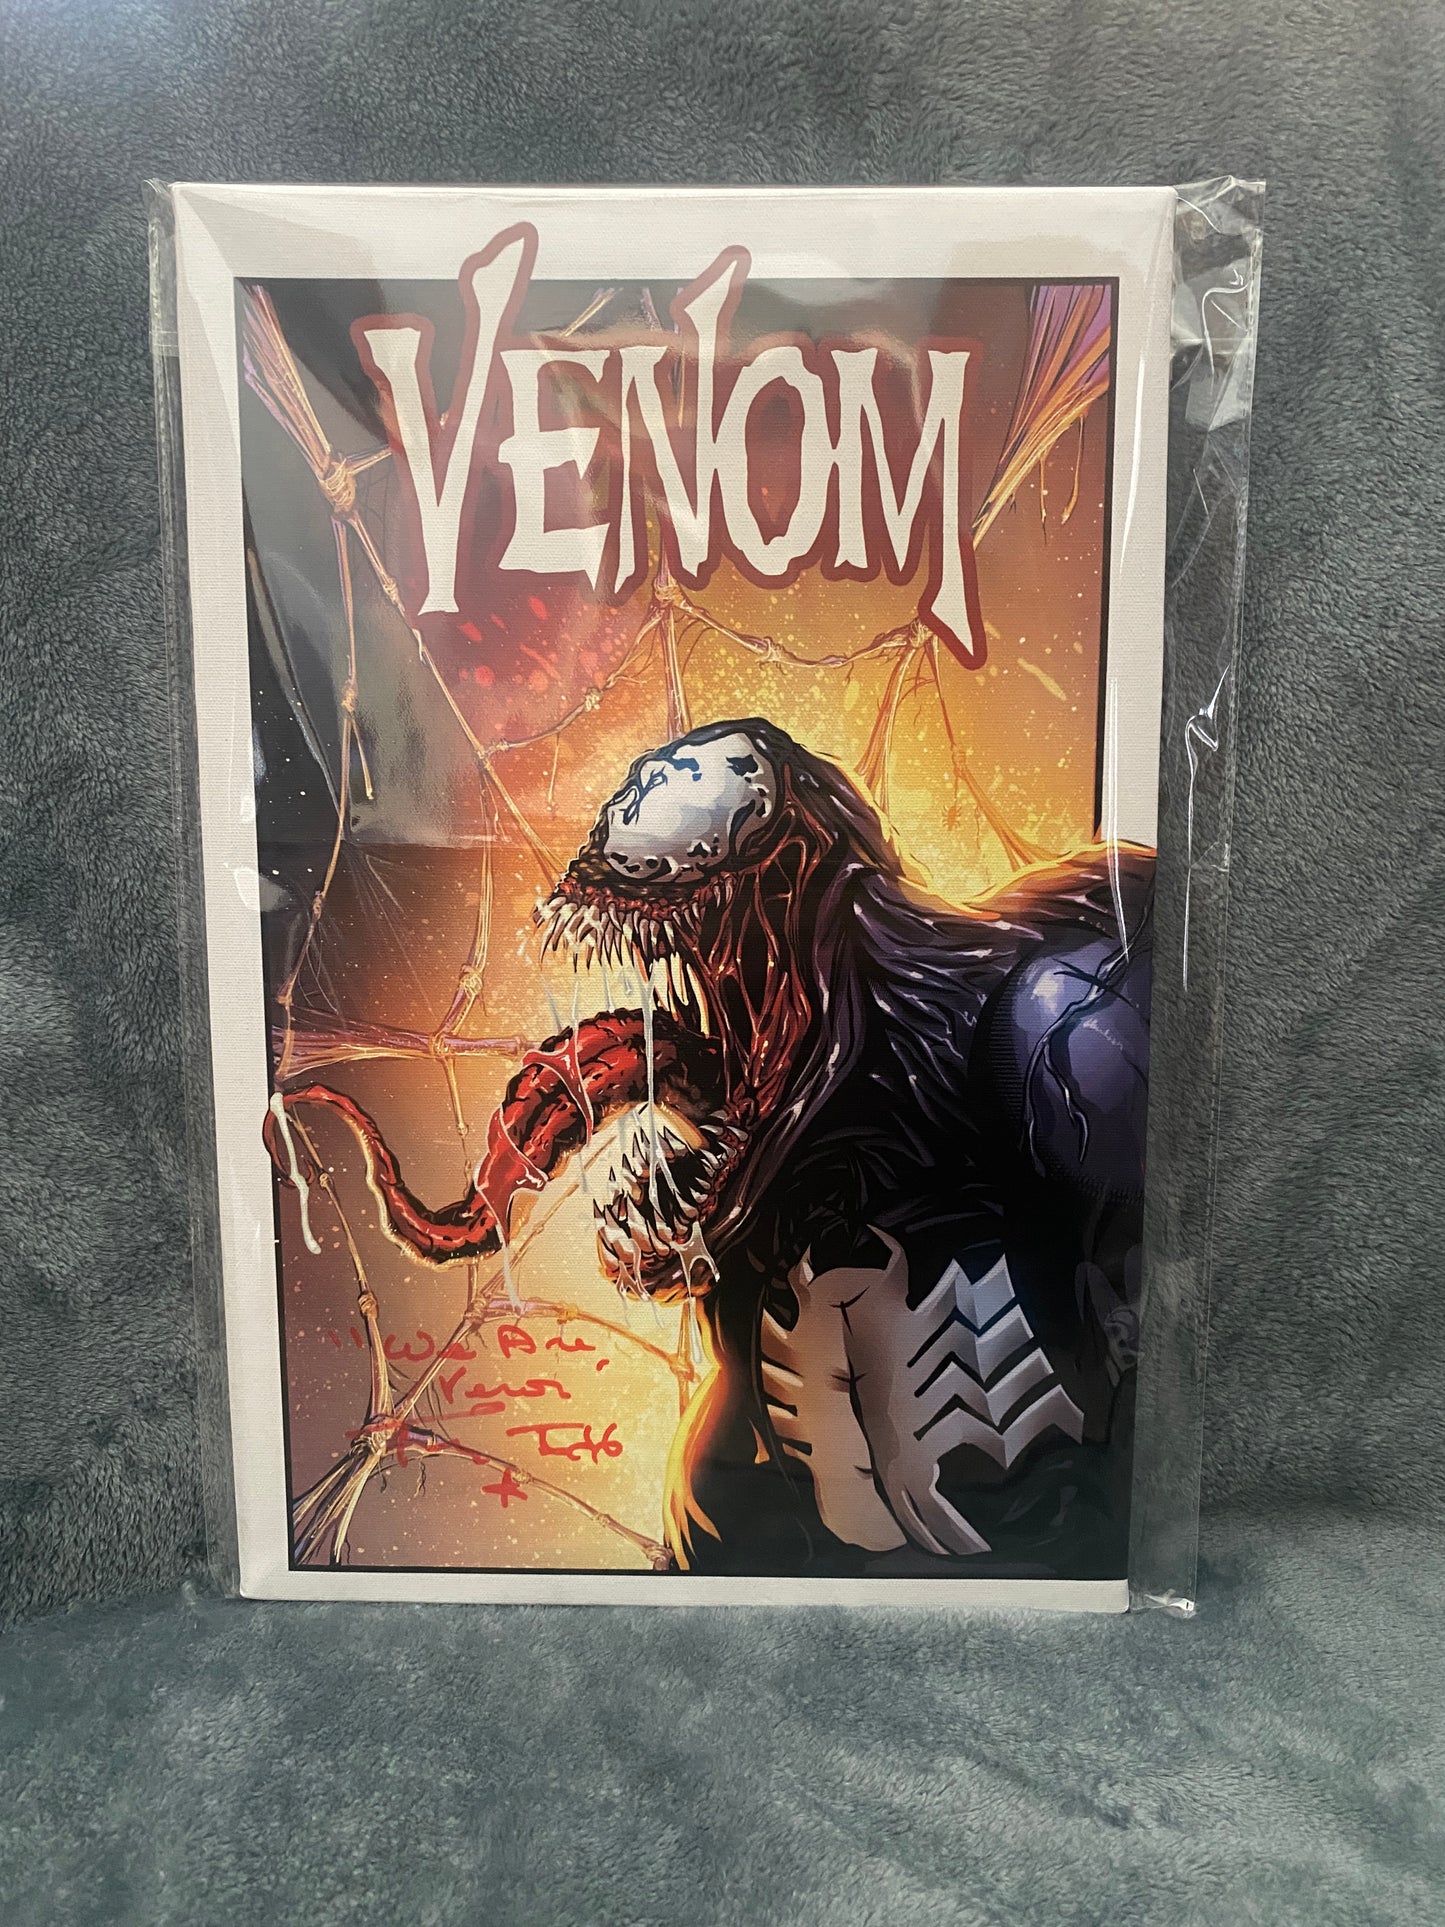 Venom signed by voice Tony Todd - Snapping Turtle Gallery